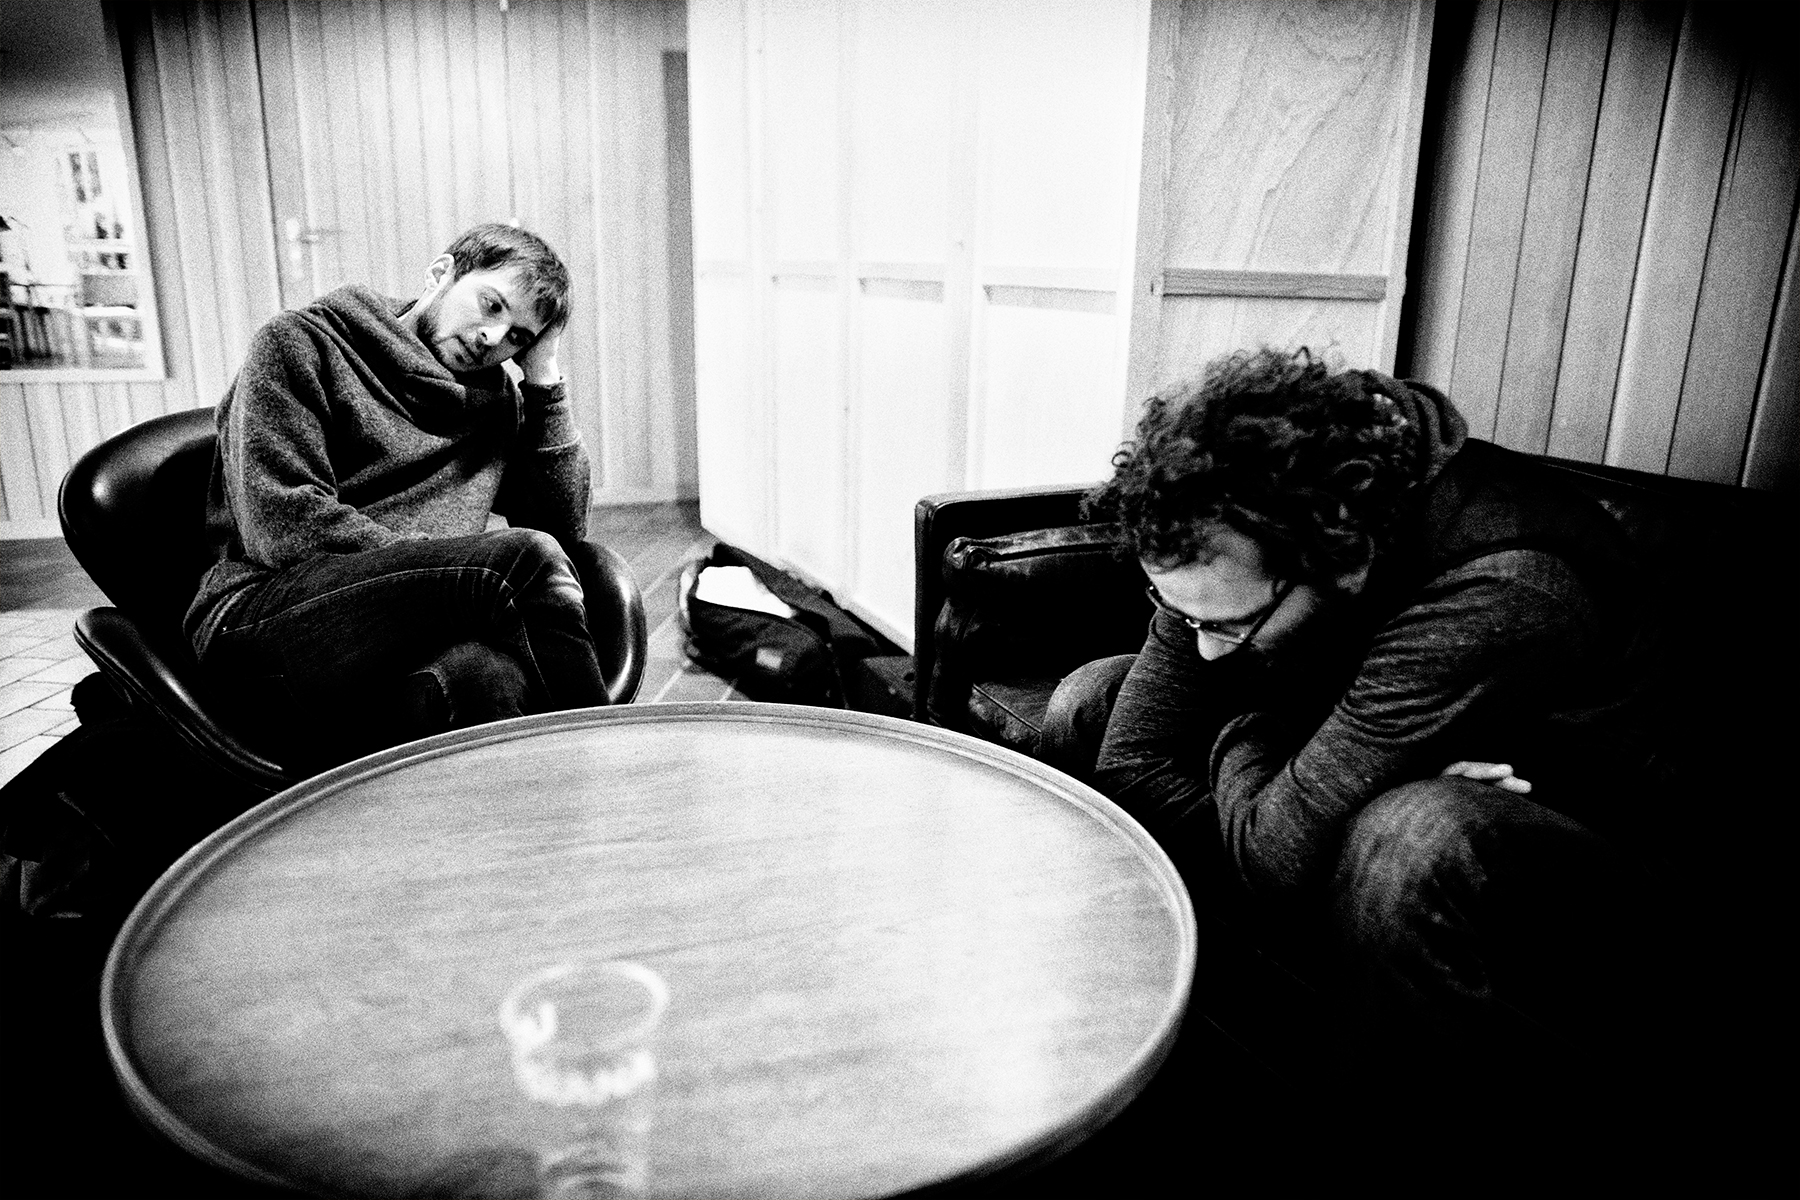 Live pictures and Portraits taken of Nils Frahm and Mikael Simpson while performing at FROST festival 2013, Louisiana